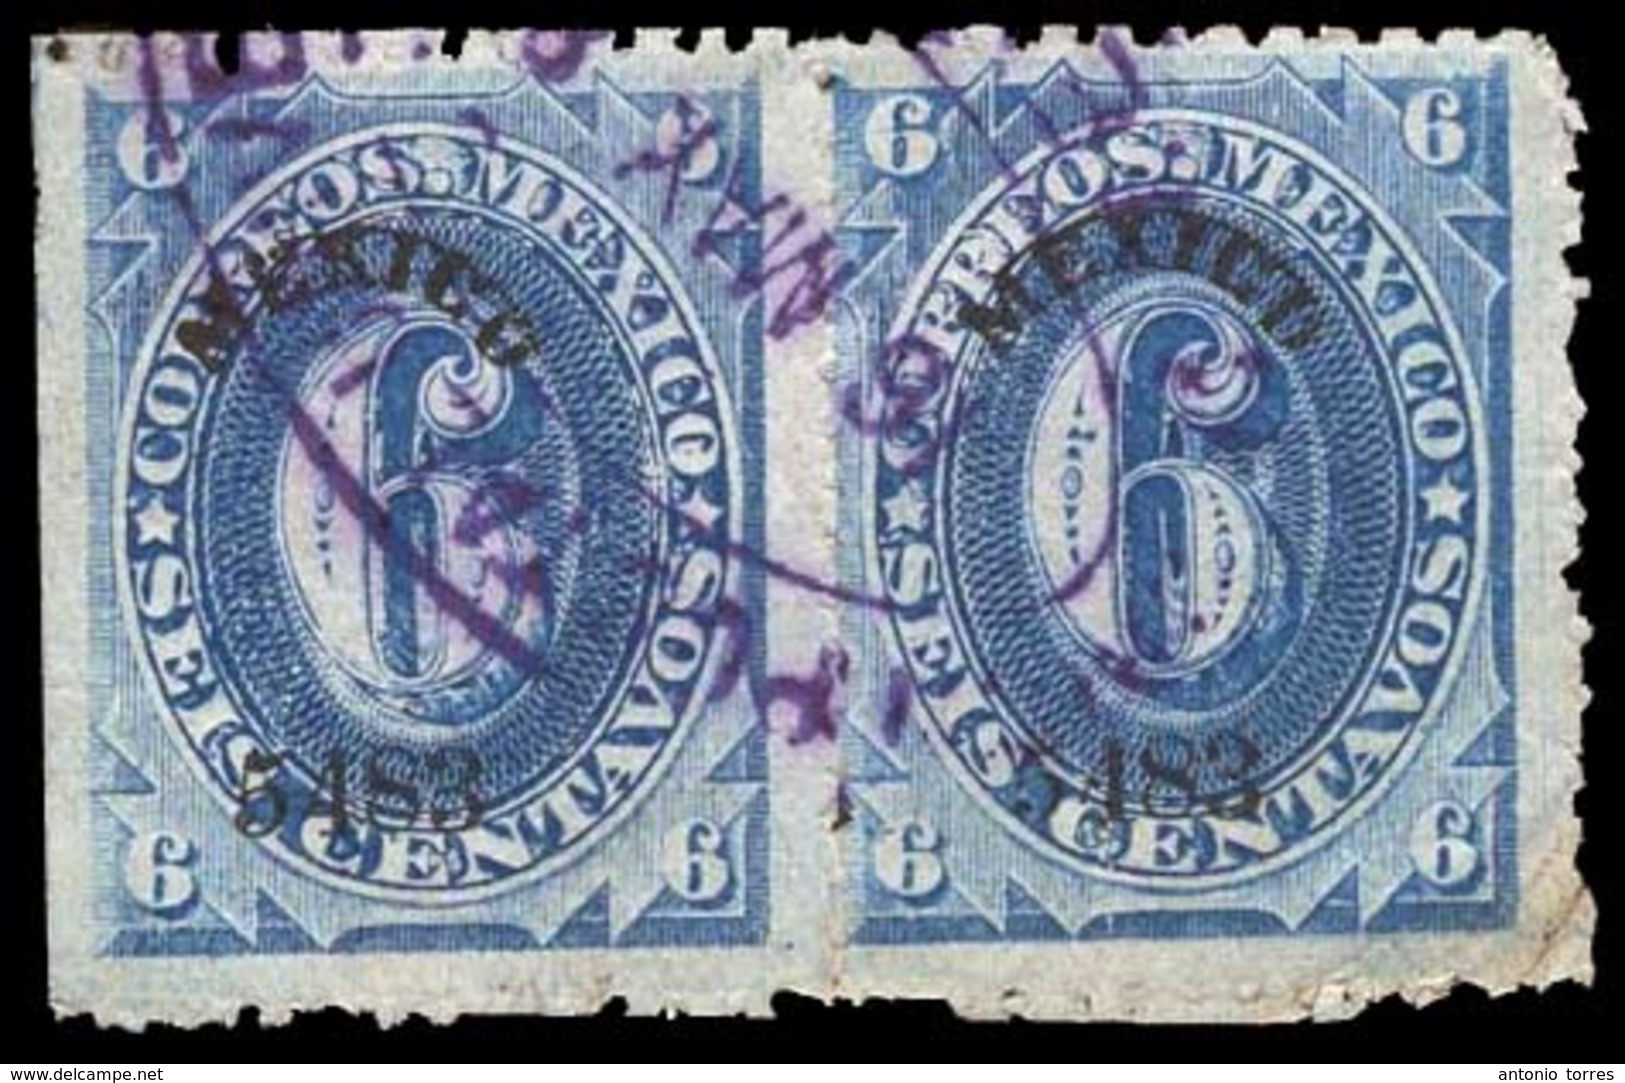 MEXICO. 6c Mexico 5483. Violet Oval Cancel. Bearly Perf. Pair In Between. Sc. #148 X 2. Used. XF. - Messico